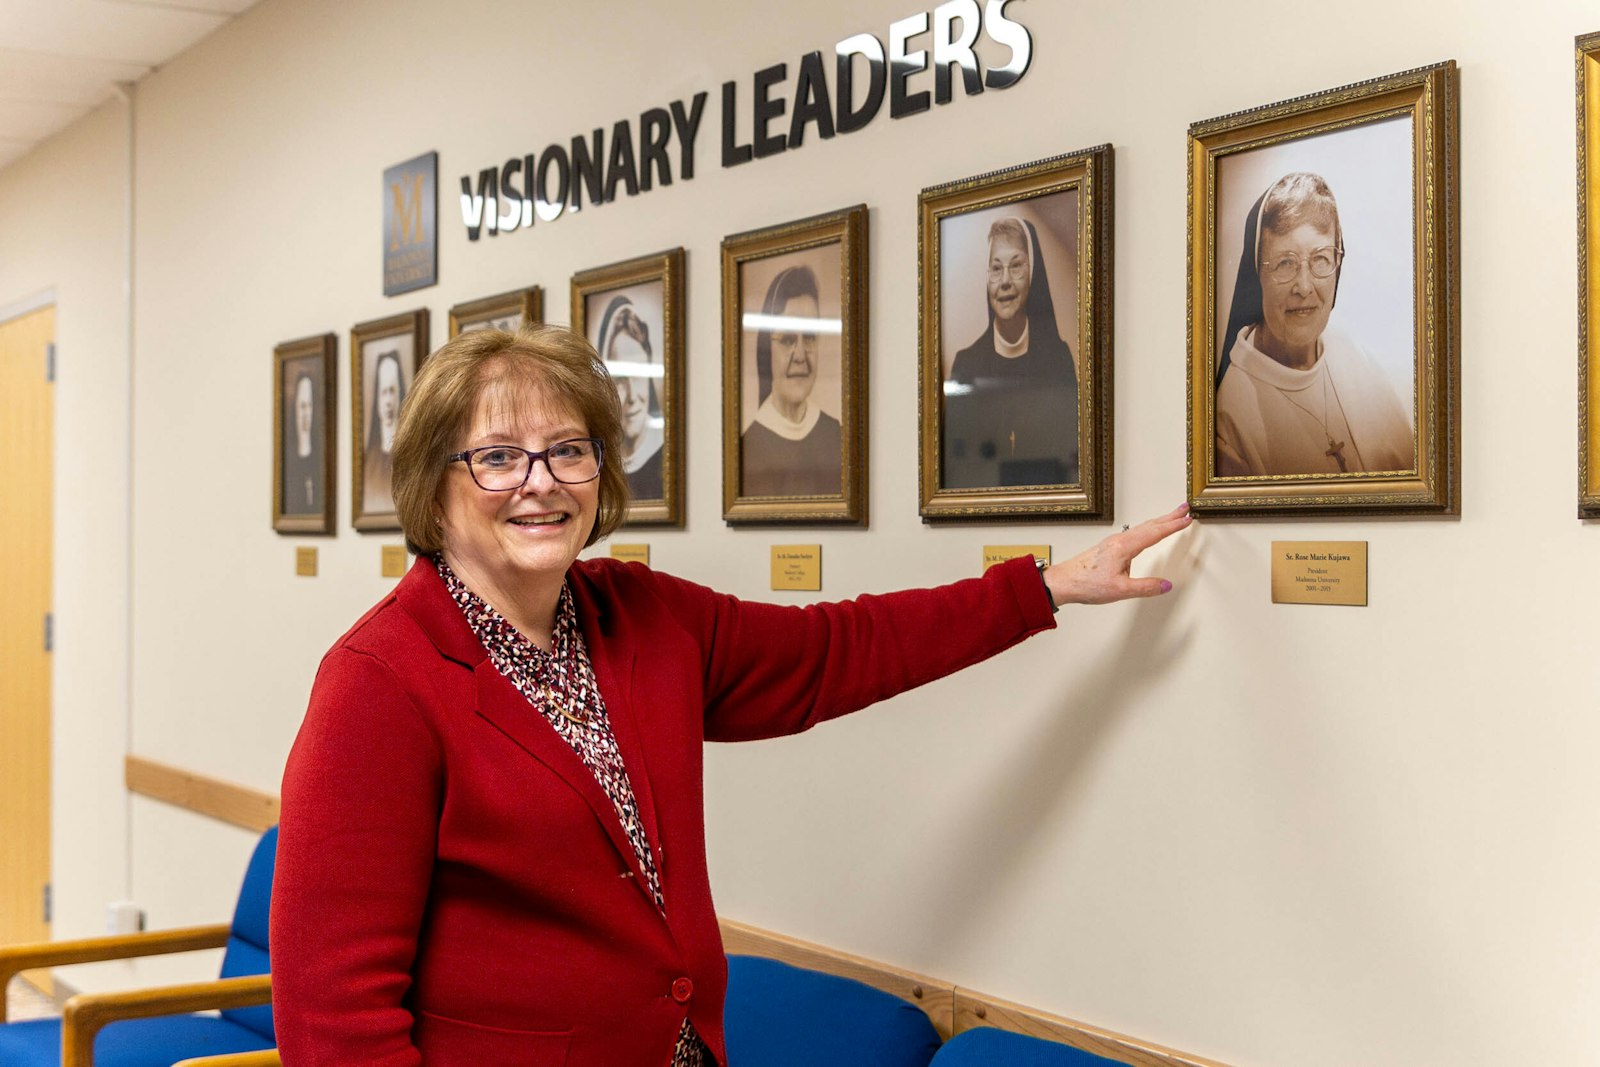 Marianne Burnett points out a portrait of Sr. Rose Marie Kujawa, CSSF, who led Madonna University as its president from 2001-15, in the spirit of the school's Franciscan tradition.